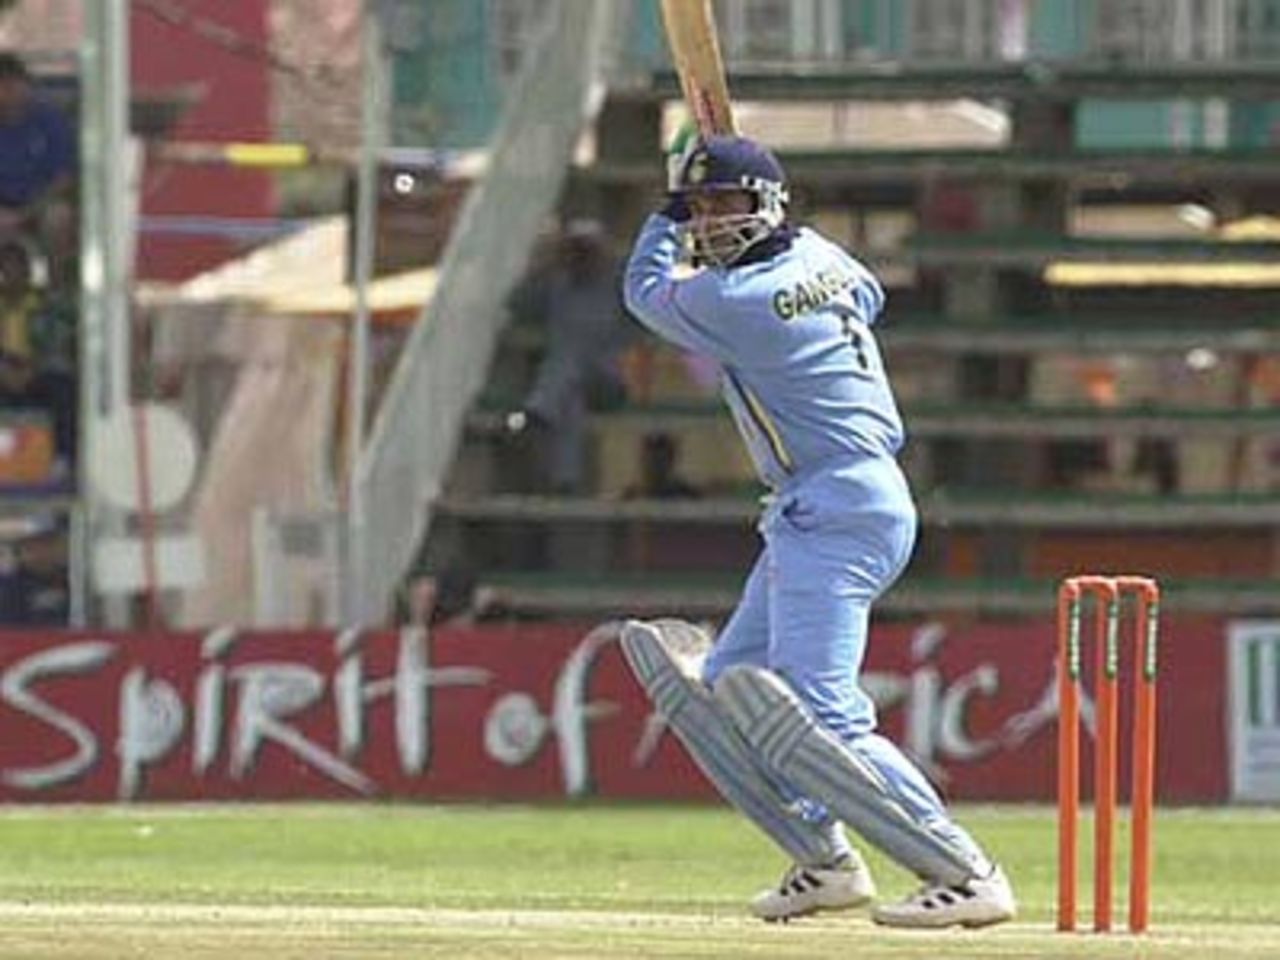 Ganguly slashes the ball past point, ICC KnockOut, 2000/01, 2nd Semi Final, India v South Africa, Gymkhana Club Ground, Nairobi, 13 October 2000.